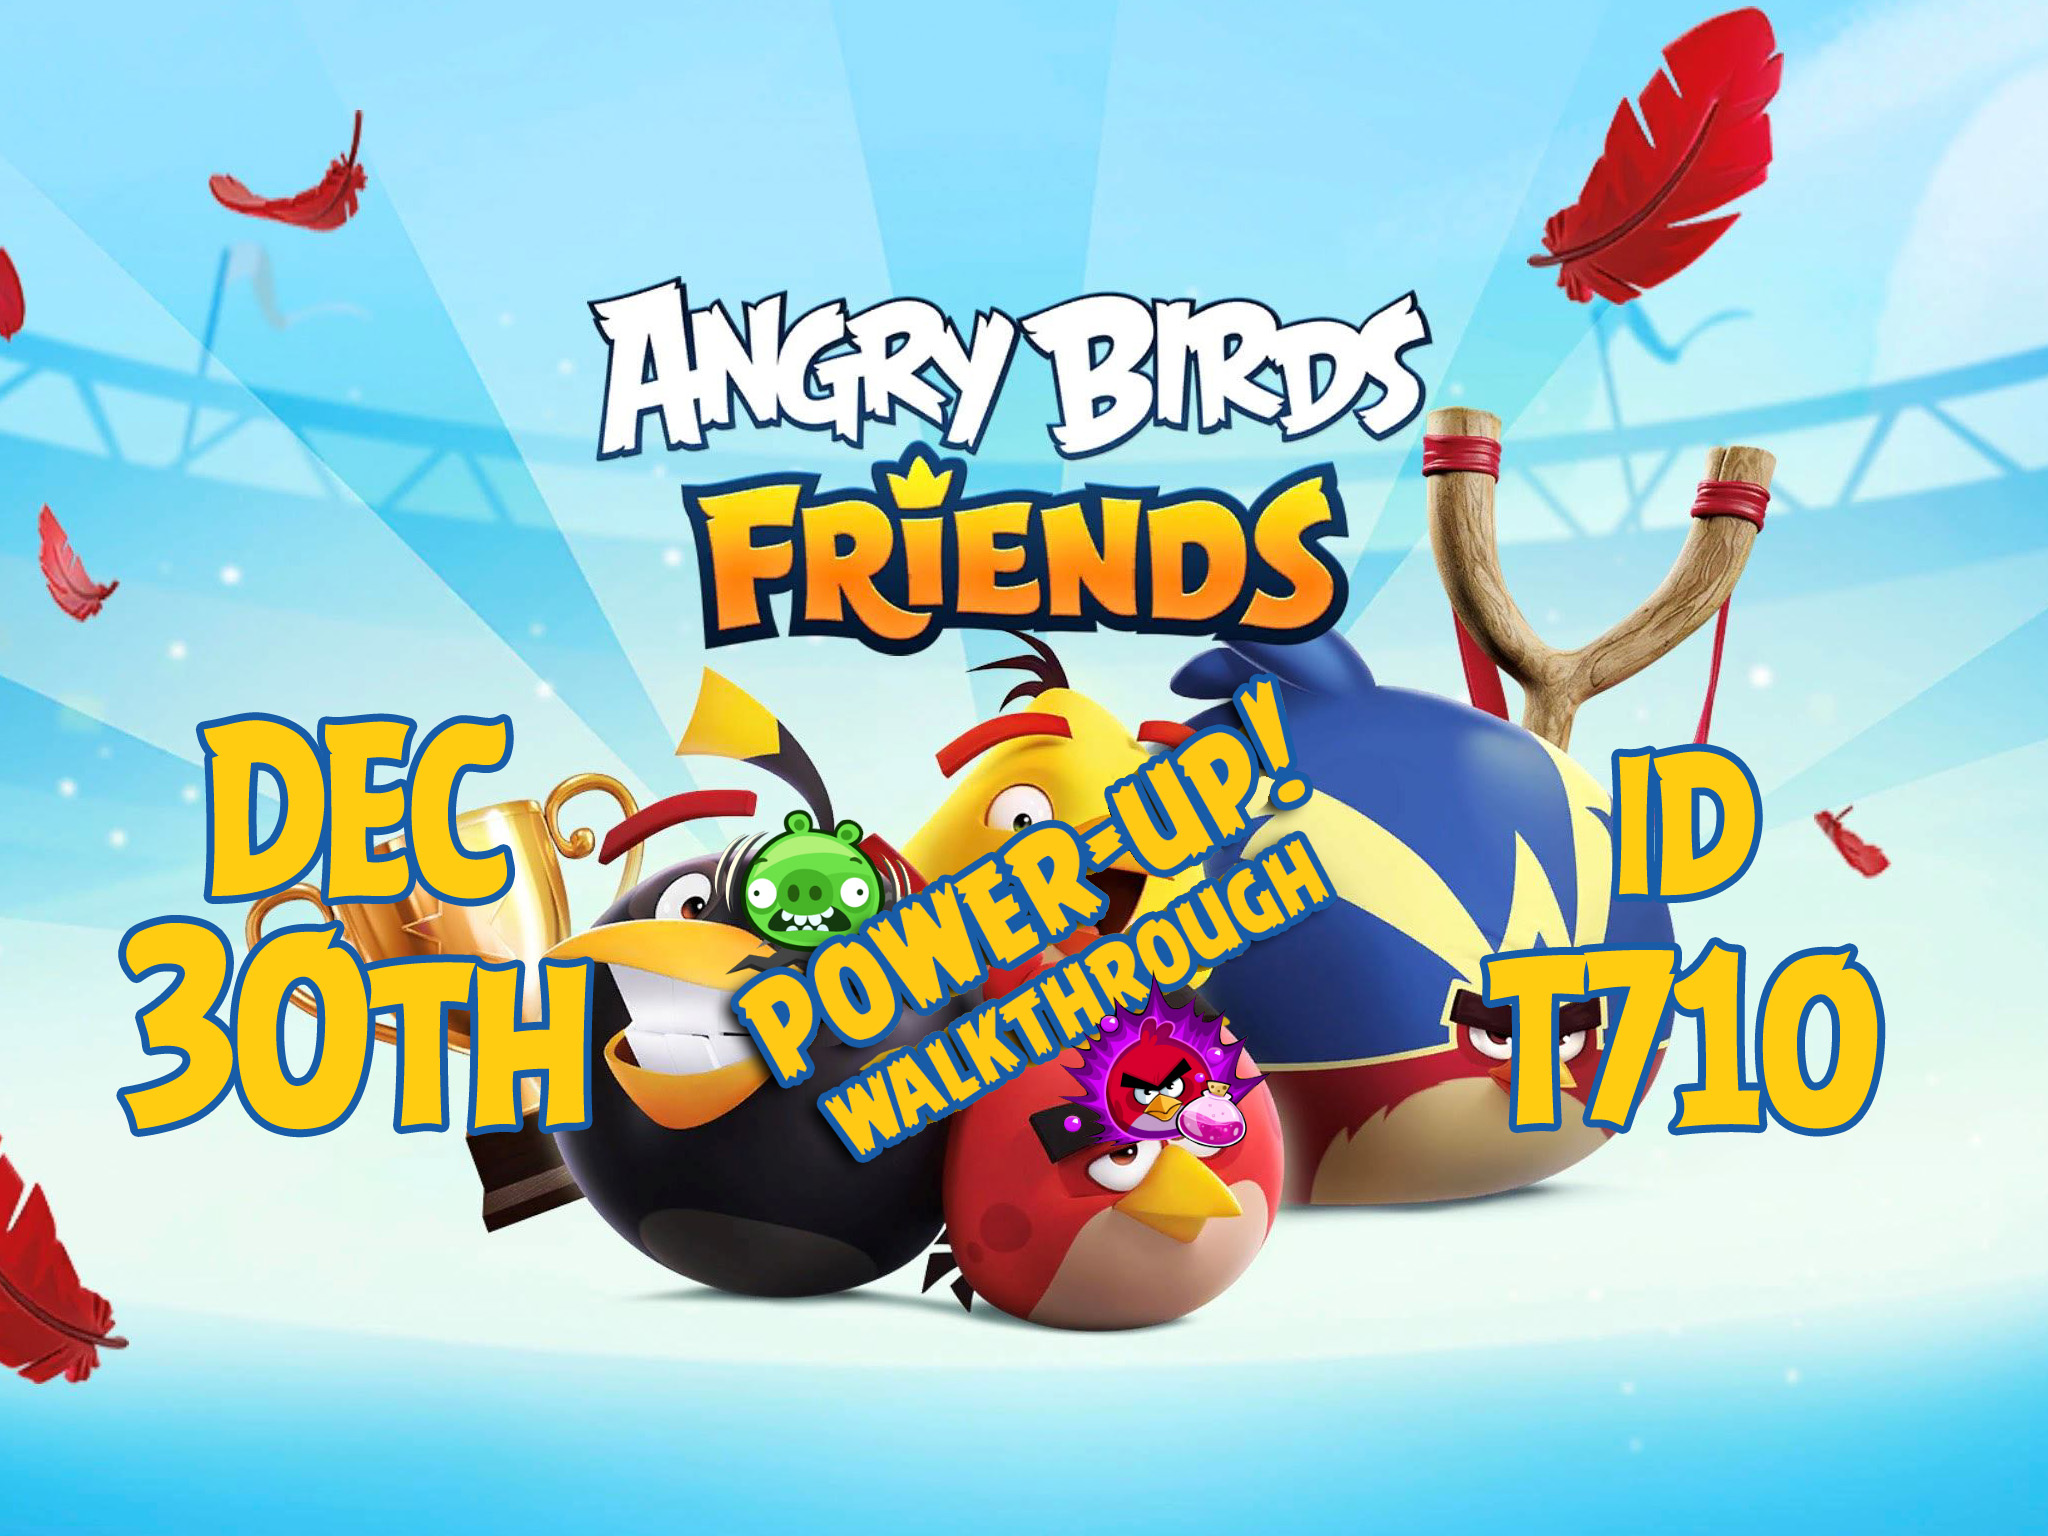 Angry-Birds-Friends-Tournament-T710-Feature-Image-PU